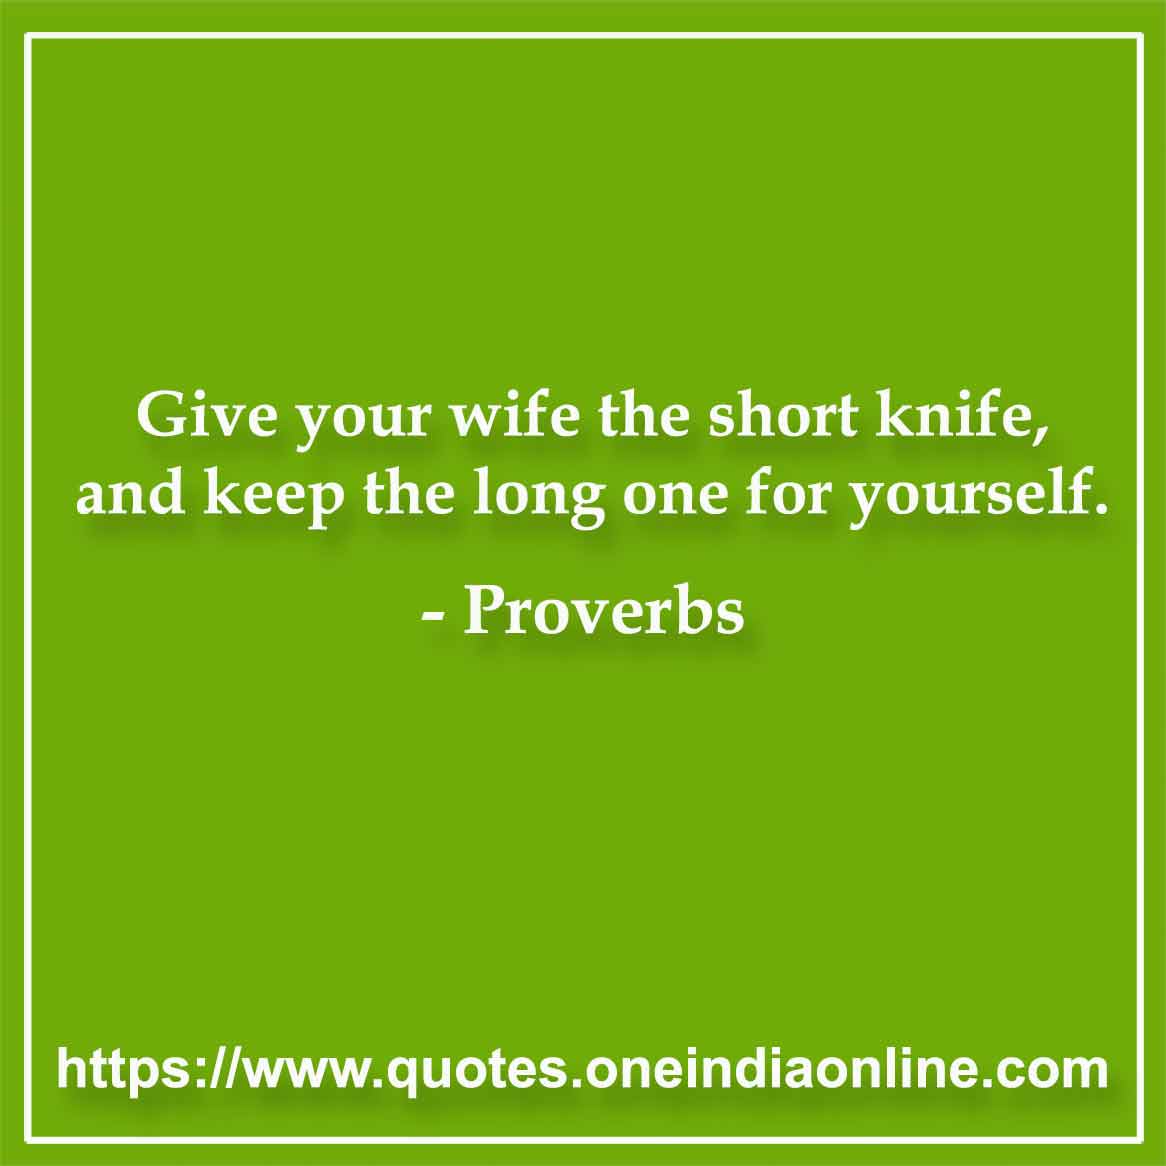 Give your wife the short knife, and keep the long one for yourself.

